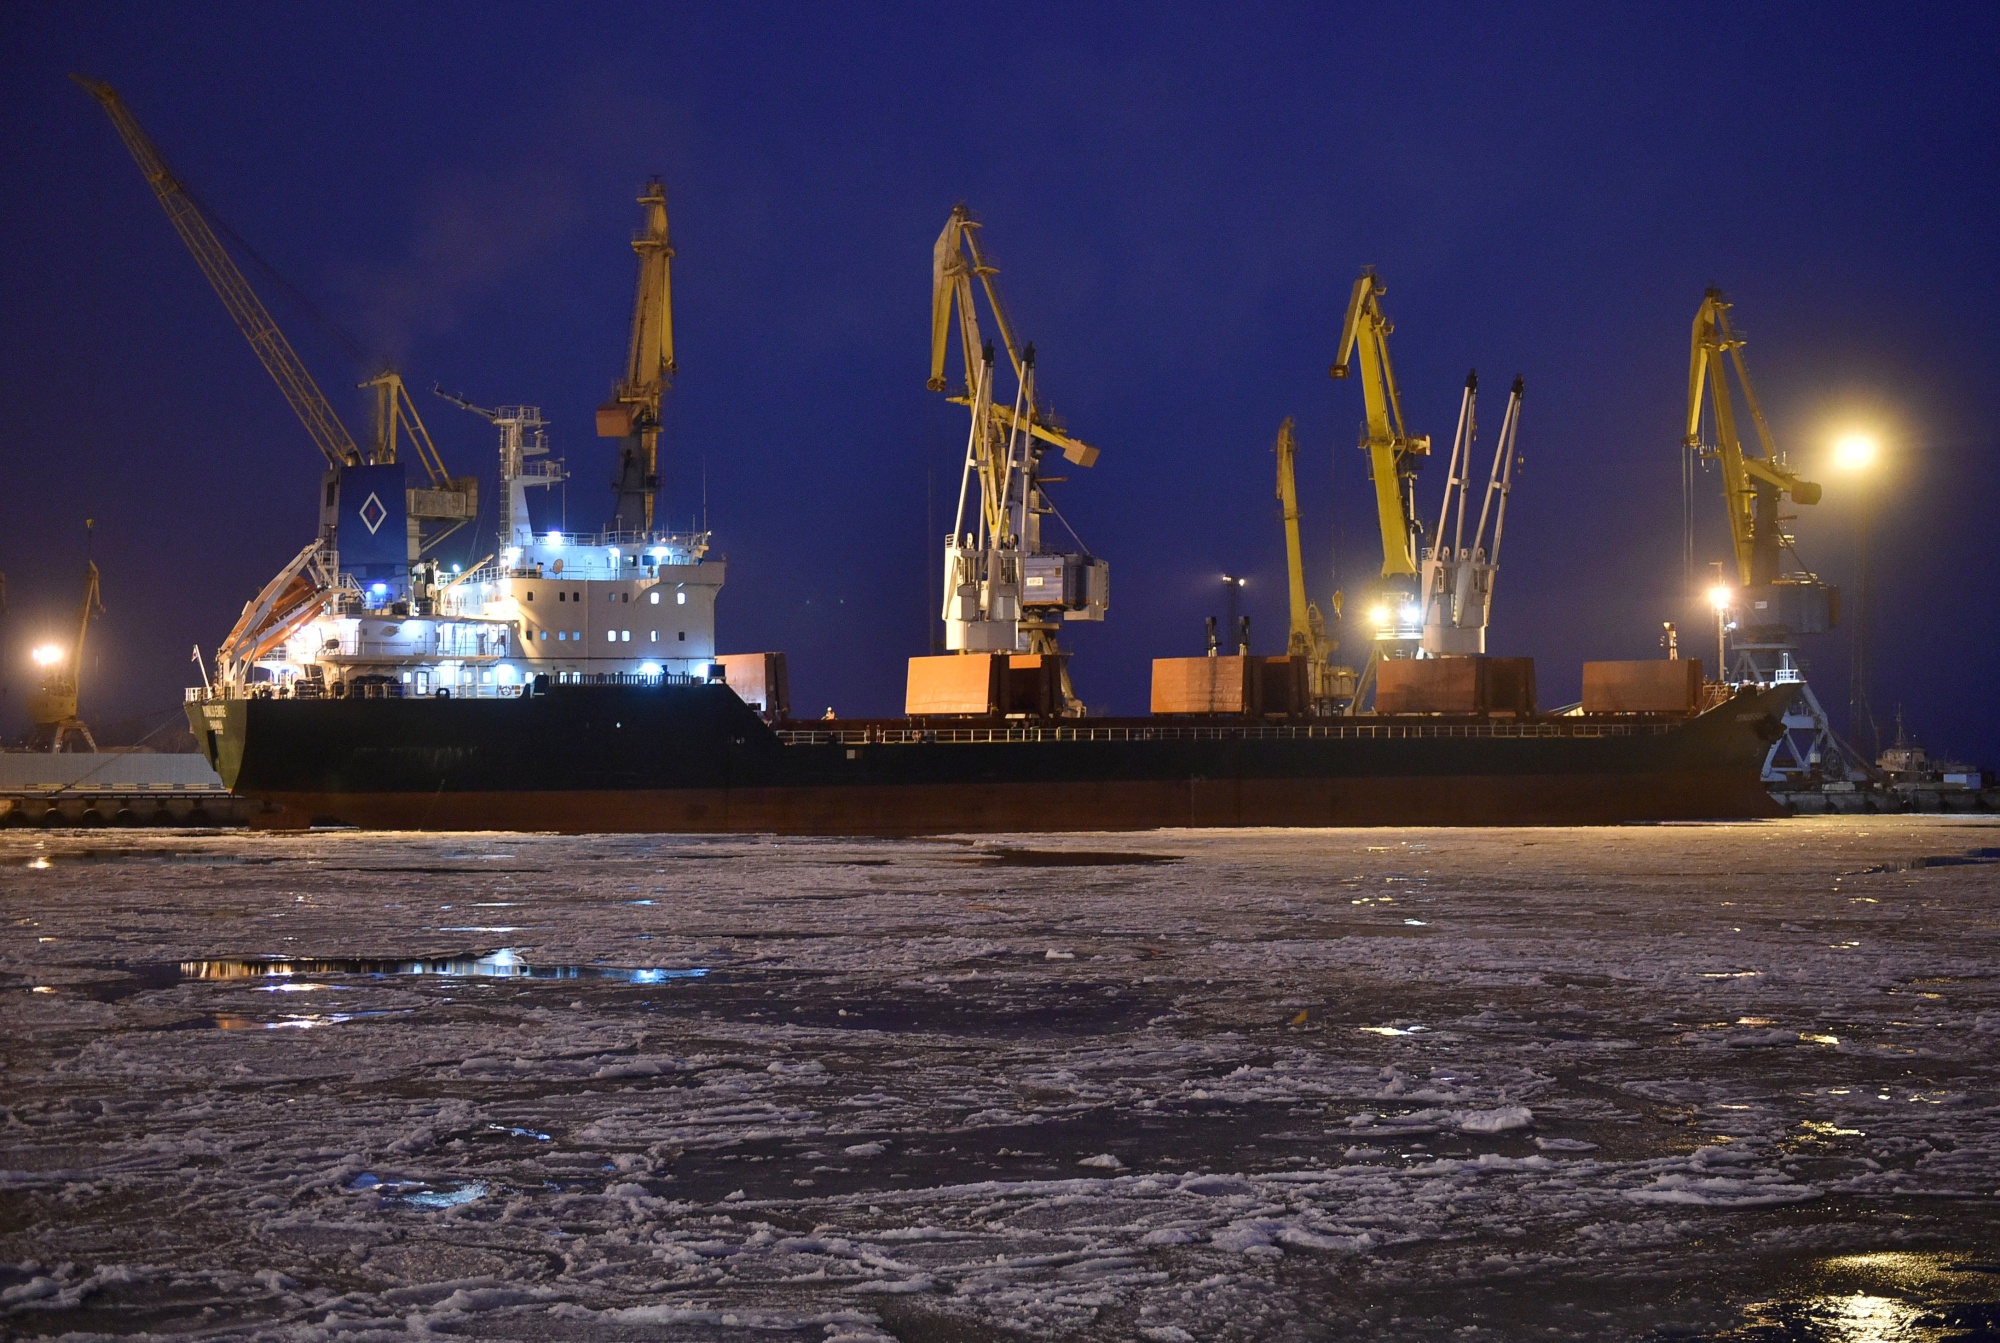 A cargo ship is moored by the Port of Mariupol on the Azov Sea.